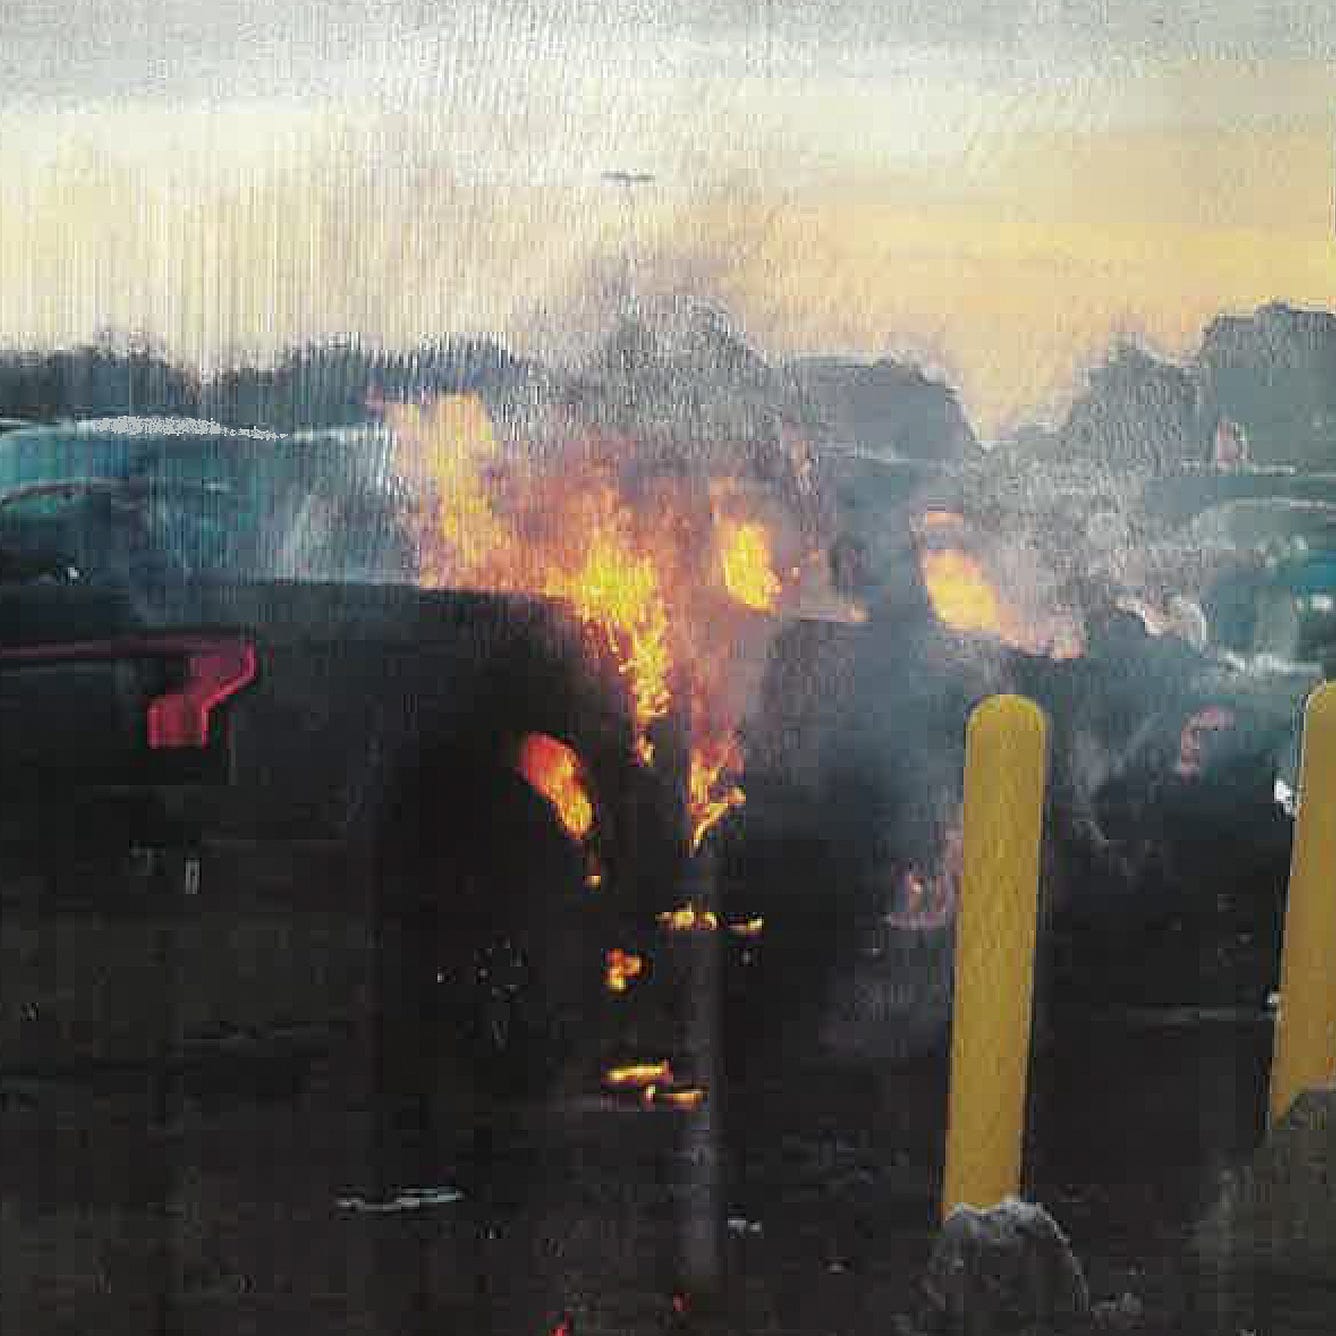 Images of the February battery fire damage to all-electric Ford F-150 pickup trucks in a Dearborn holding lot. Dearborn police and fire personnel responded to the incident, which involved three electric vehicles and no injuries and resulted in a five-week production shutdown.